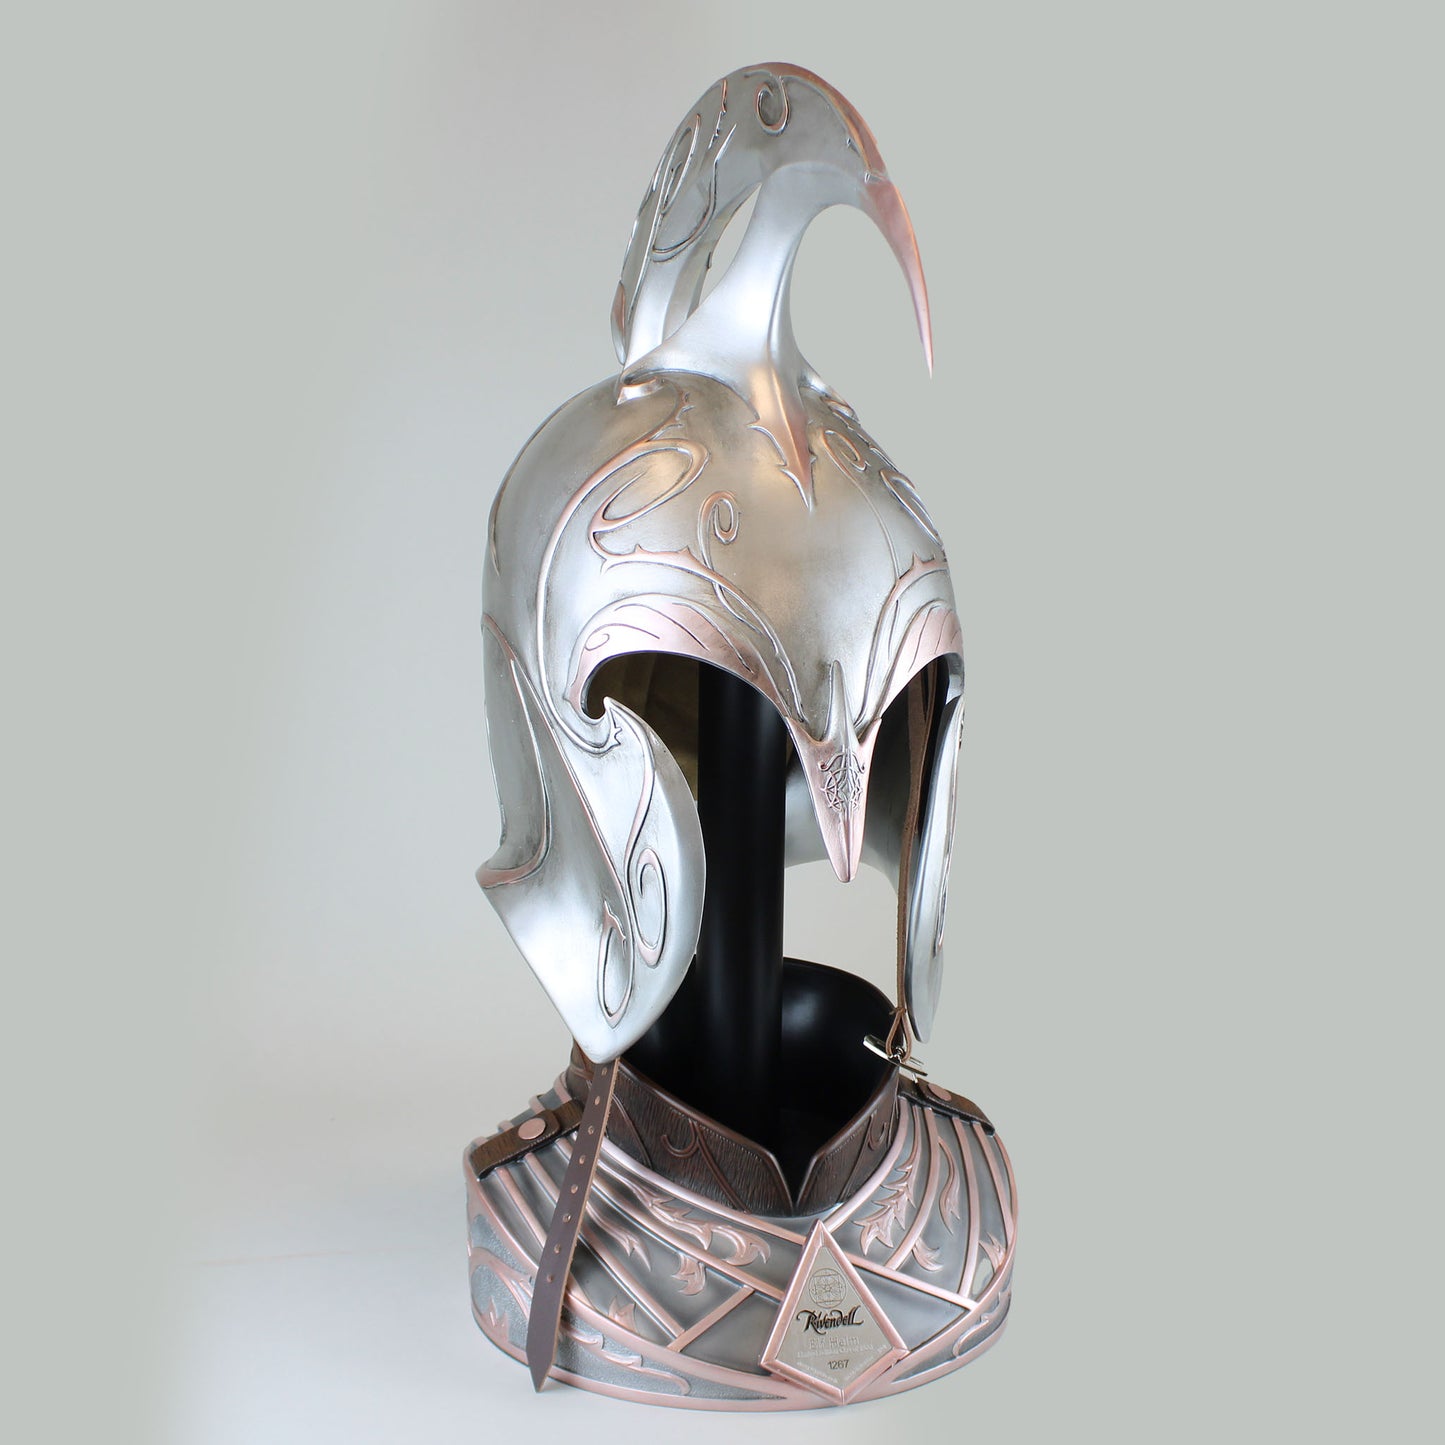 Load image into Gallery viewer, Rivendell Elf Helm (Lord of the Rings) Prop Replica
